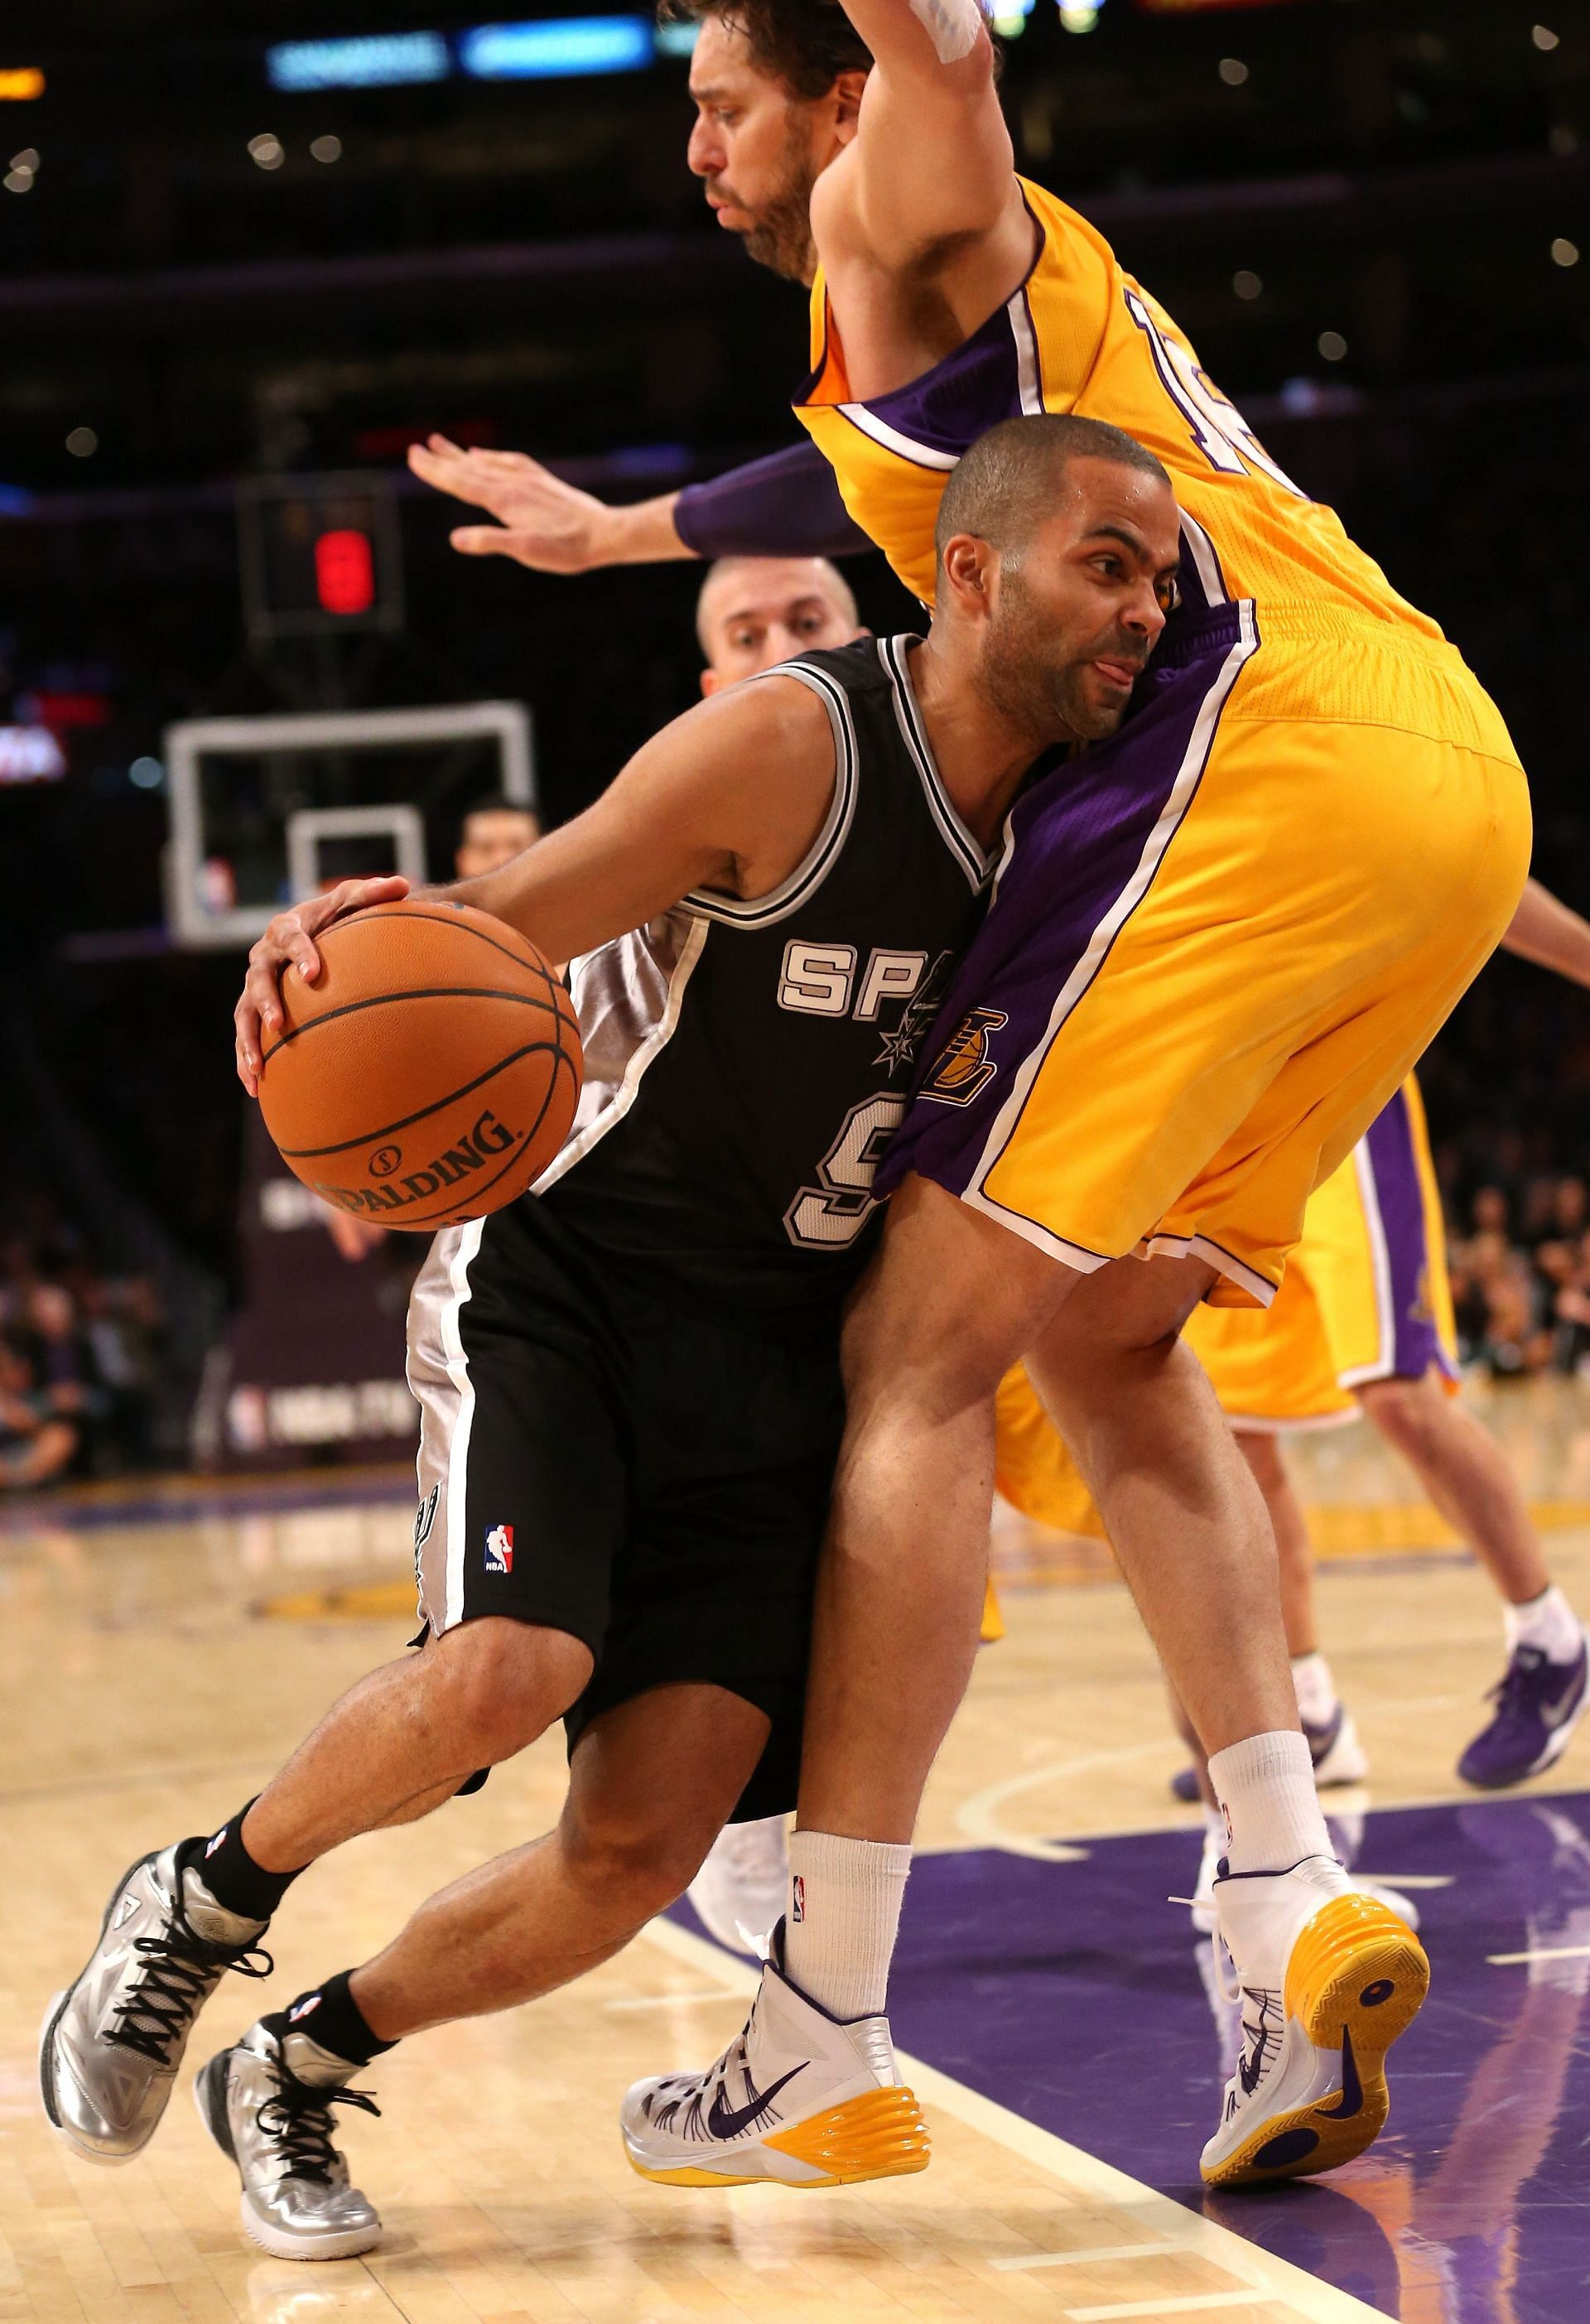 Tony Parker #9 of the San Antonio Spurs drives against Pau Gasol #16 of the Los Angeles Lakers at Staples Center on November 1, 2013 in Los Angeles, California.